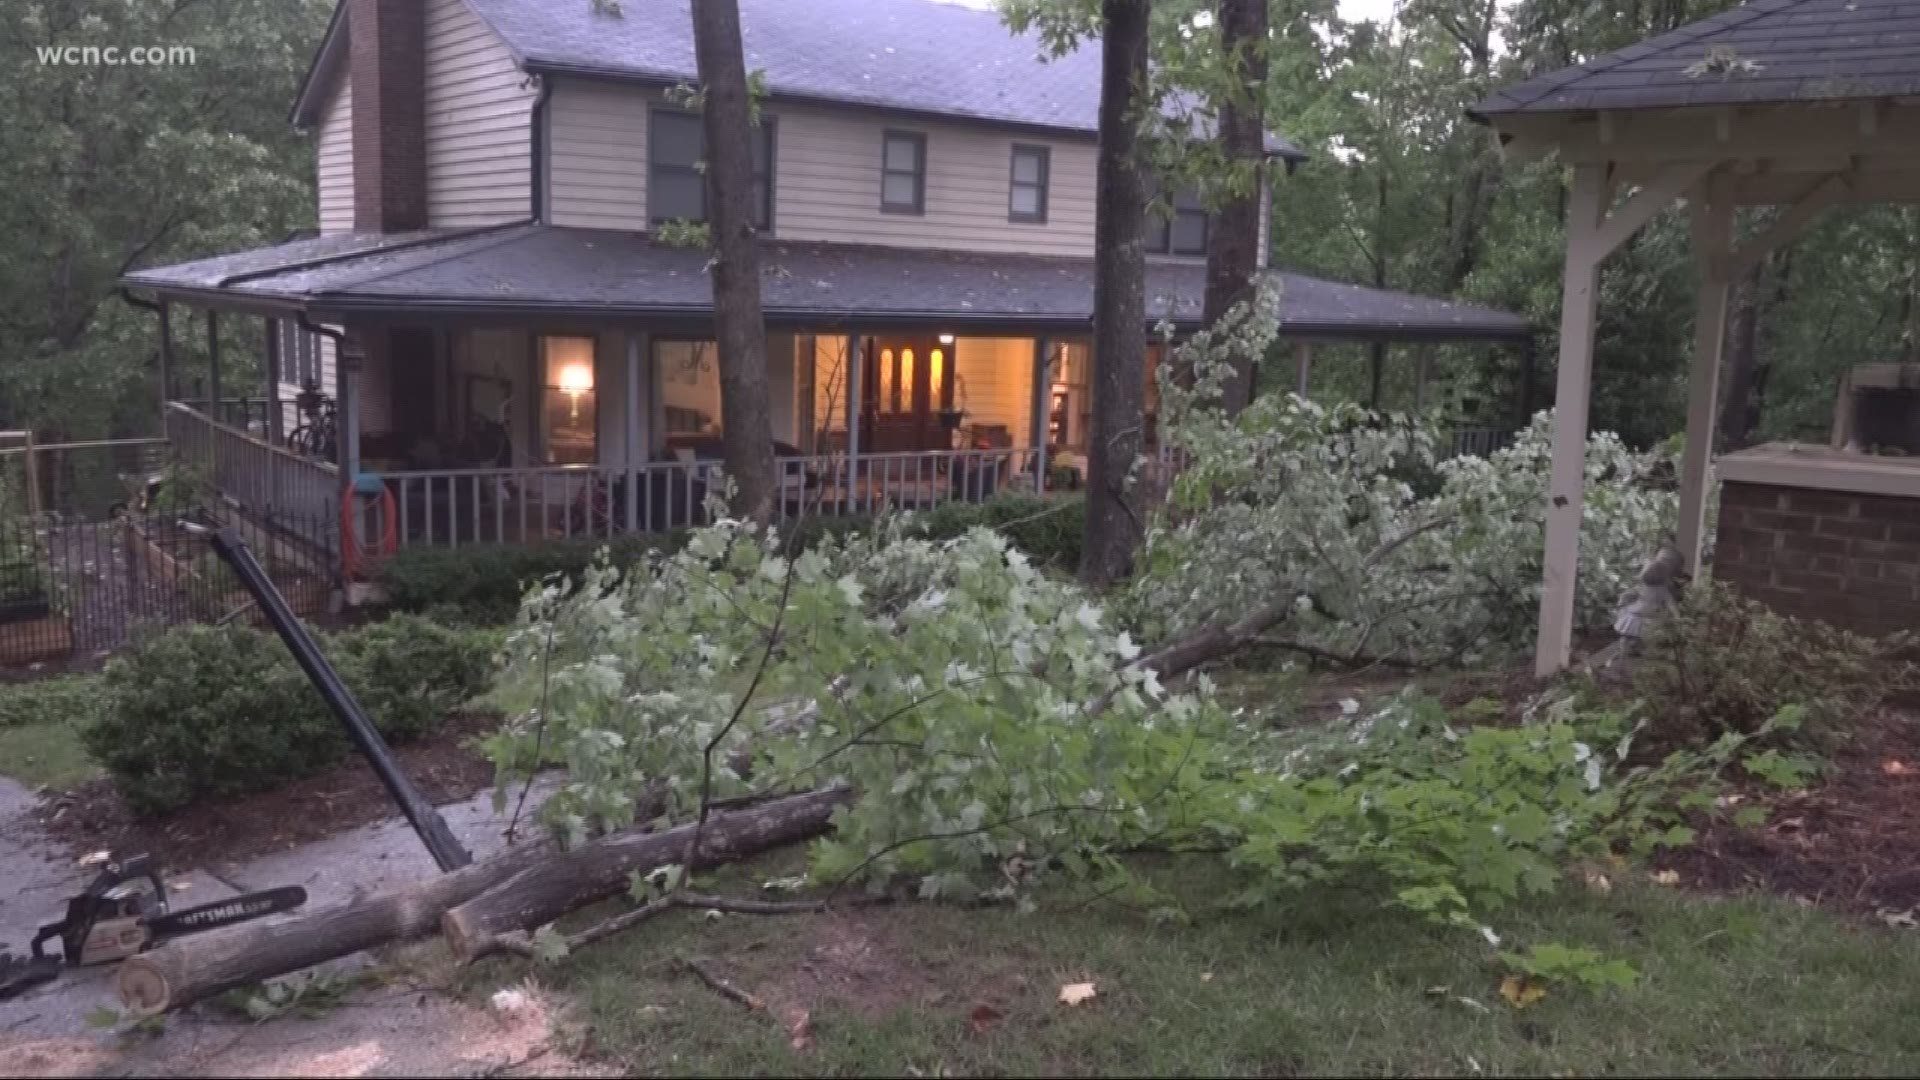 Strong storms moved through Charlotte taking down trees and power lines.